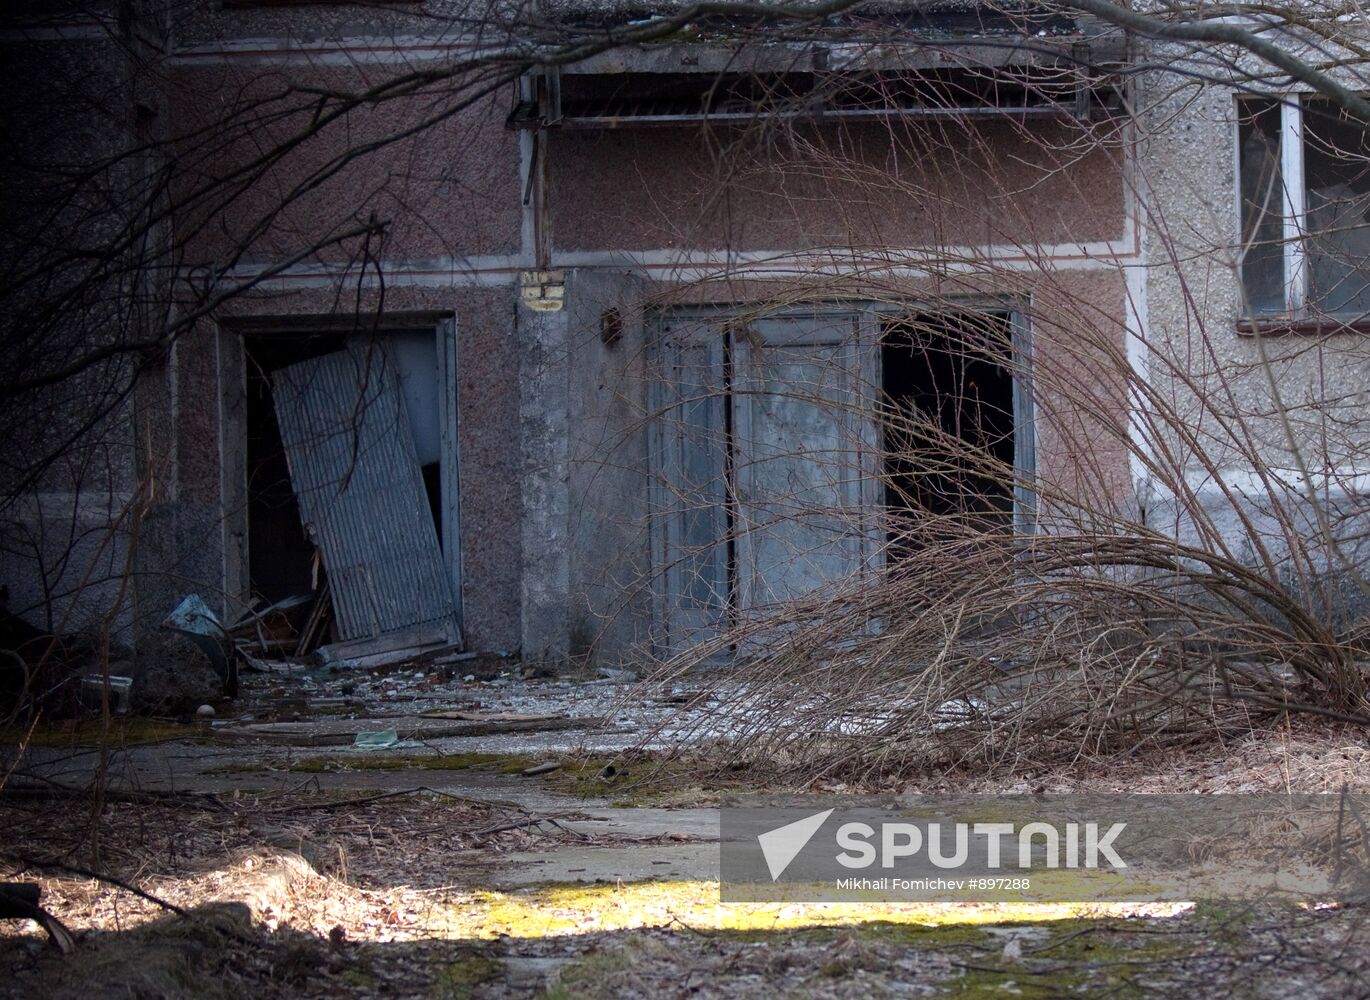 Exclusion zone of Chernobyl Nuclear Power Plant